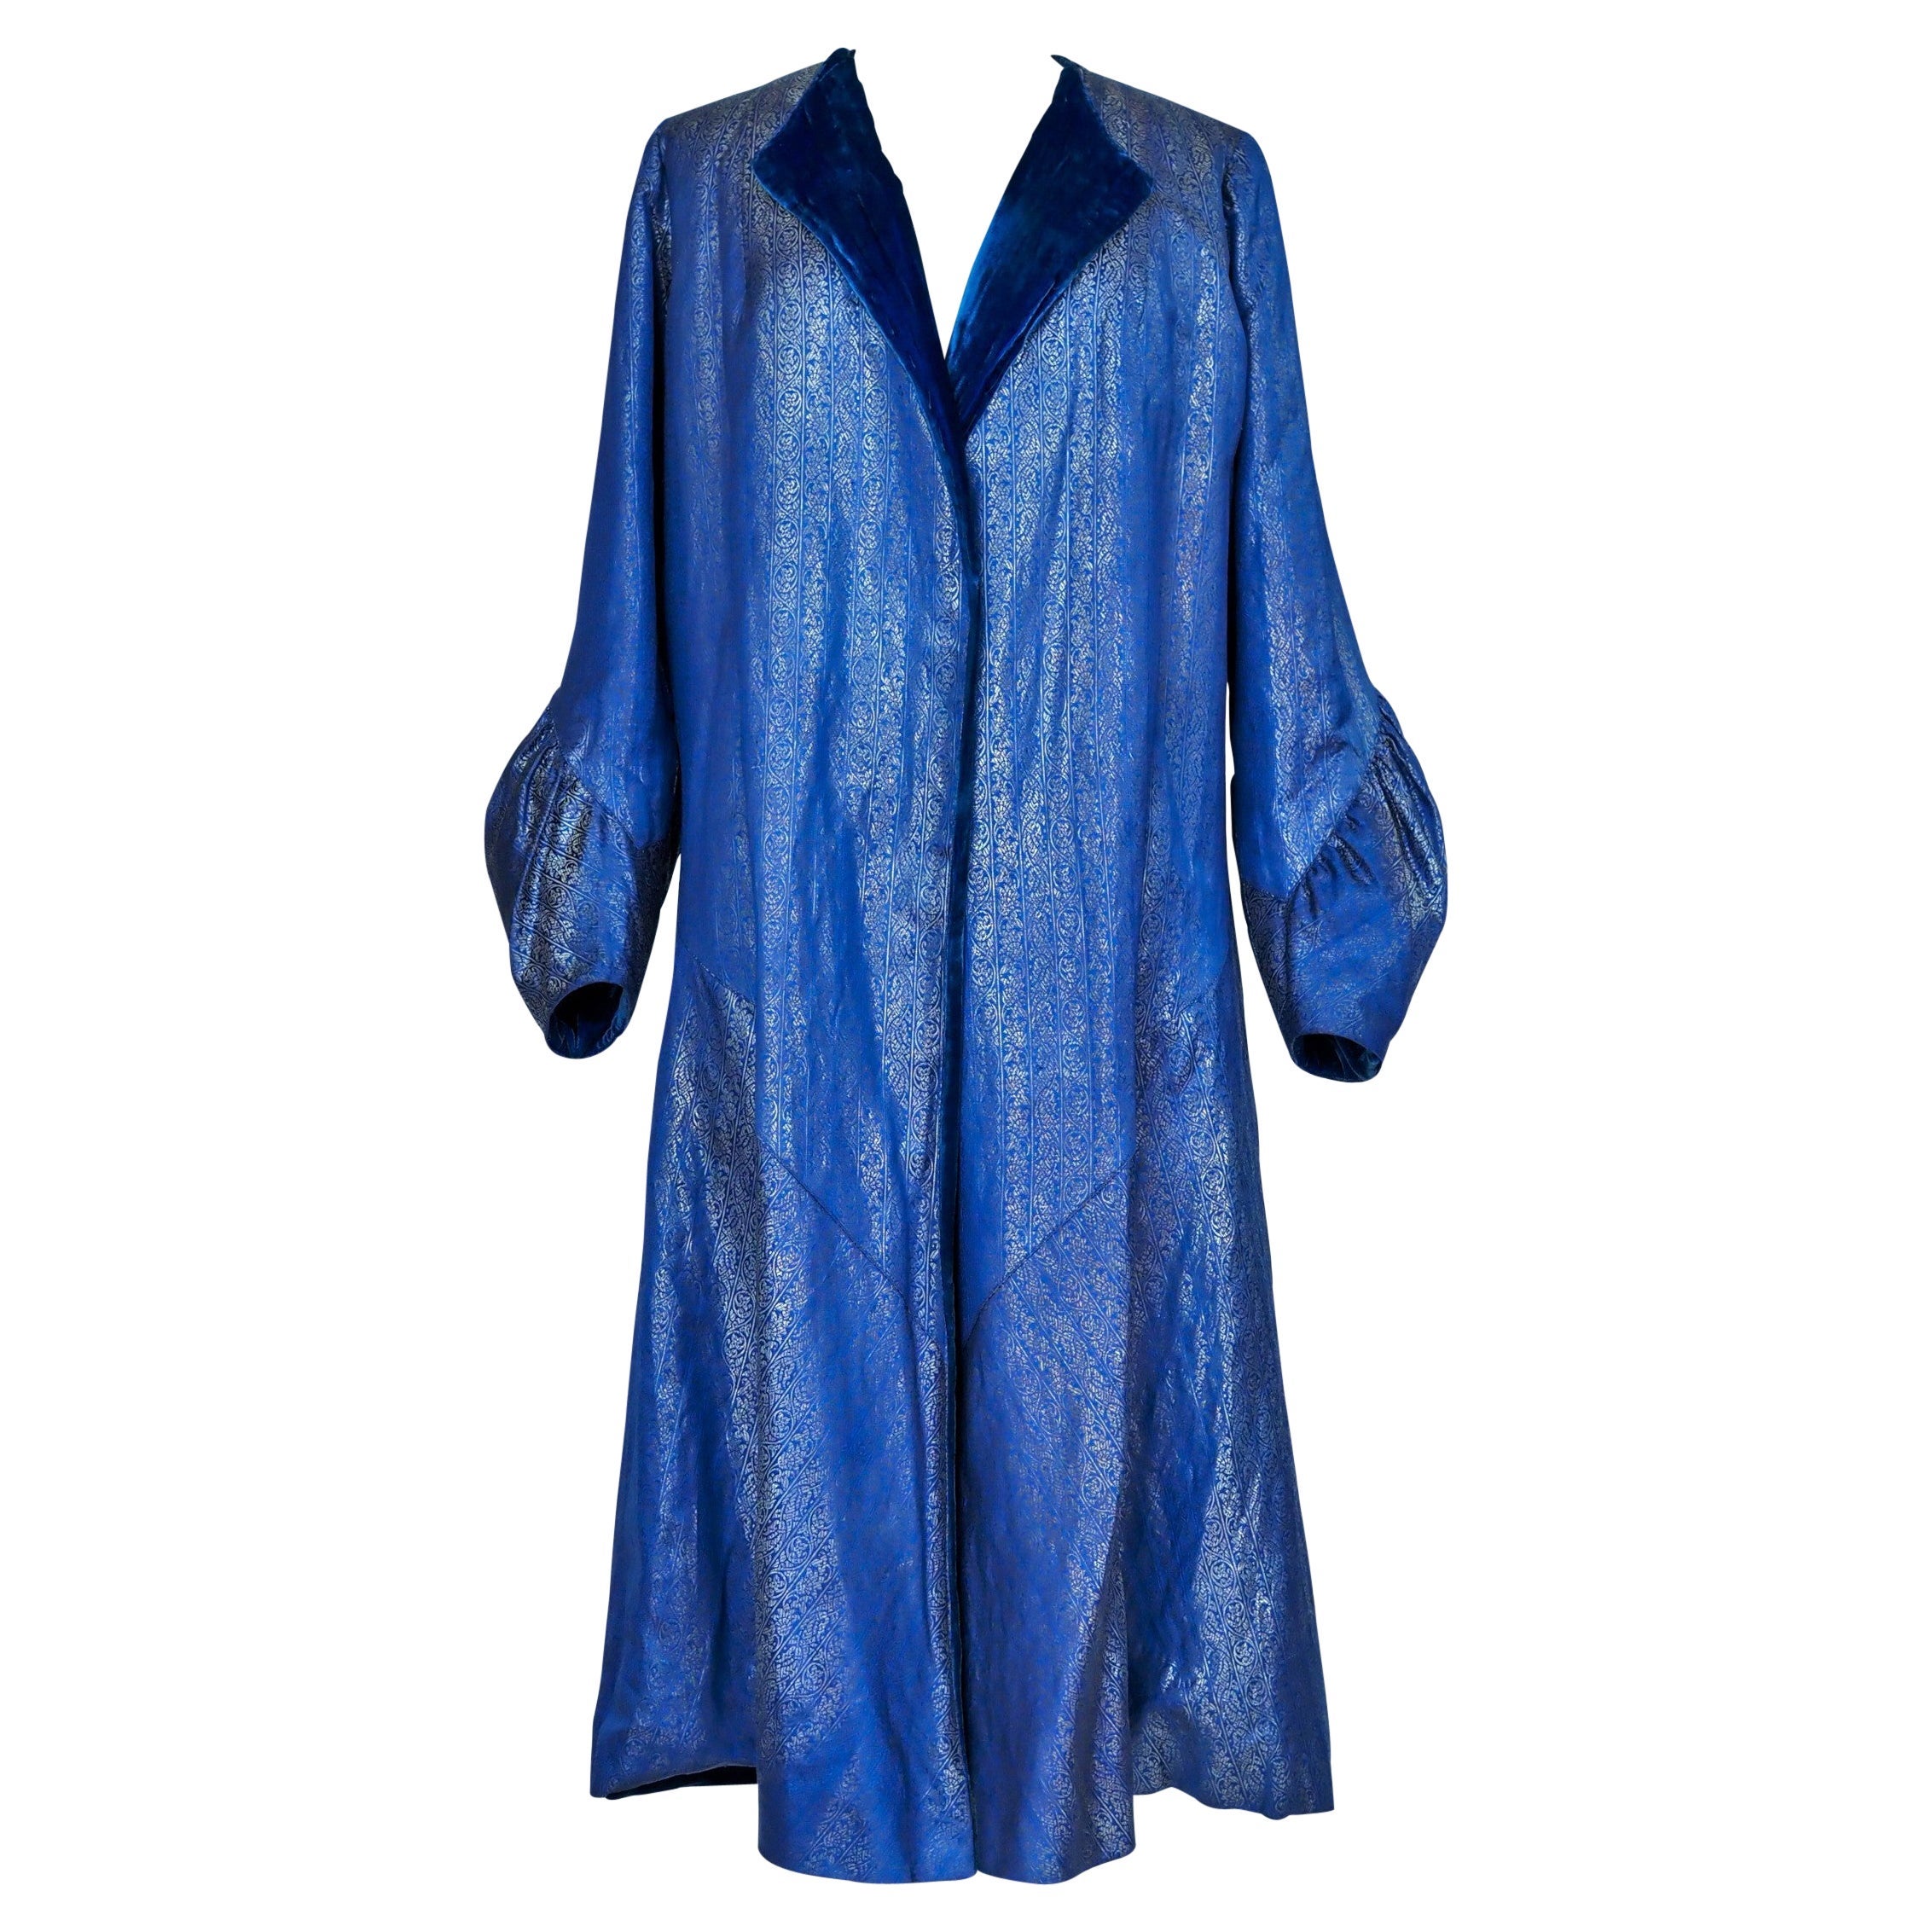 Evening Couture coat in silver lamé by Germaine Lecomte N°03871 Paris Circa 1930 For Sale